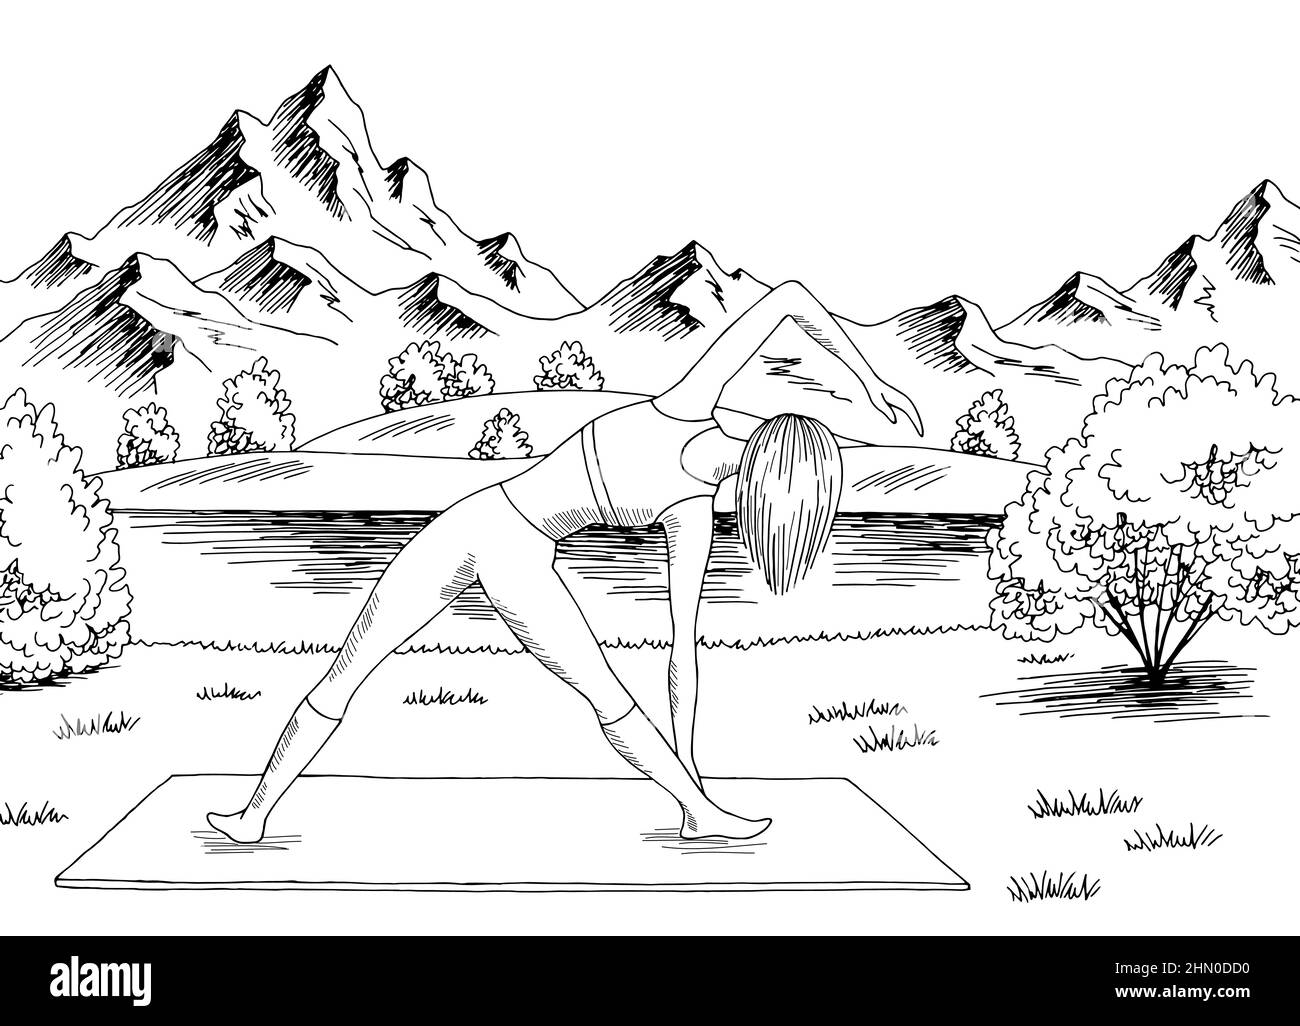 Woman practicing yoga in park graphic black white landscape sketch illustration vector Stock Vector